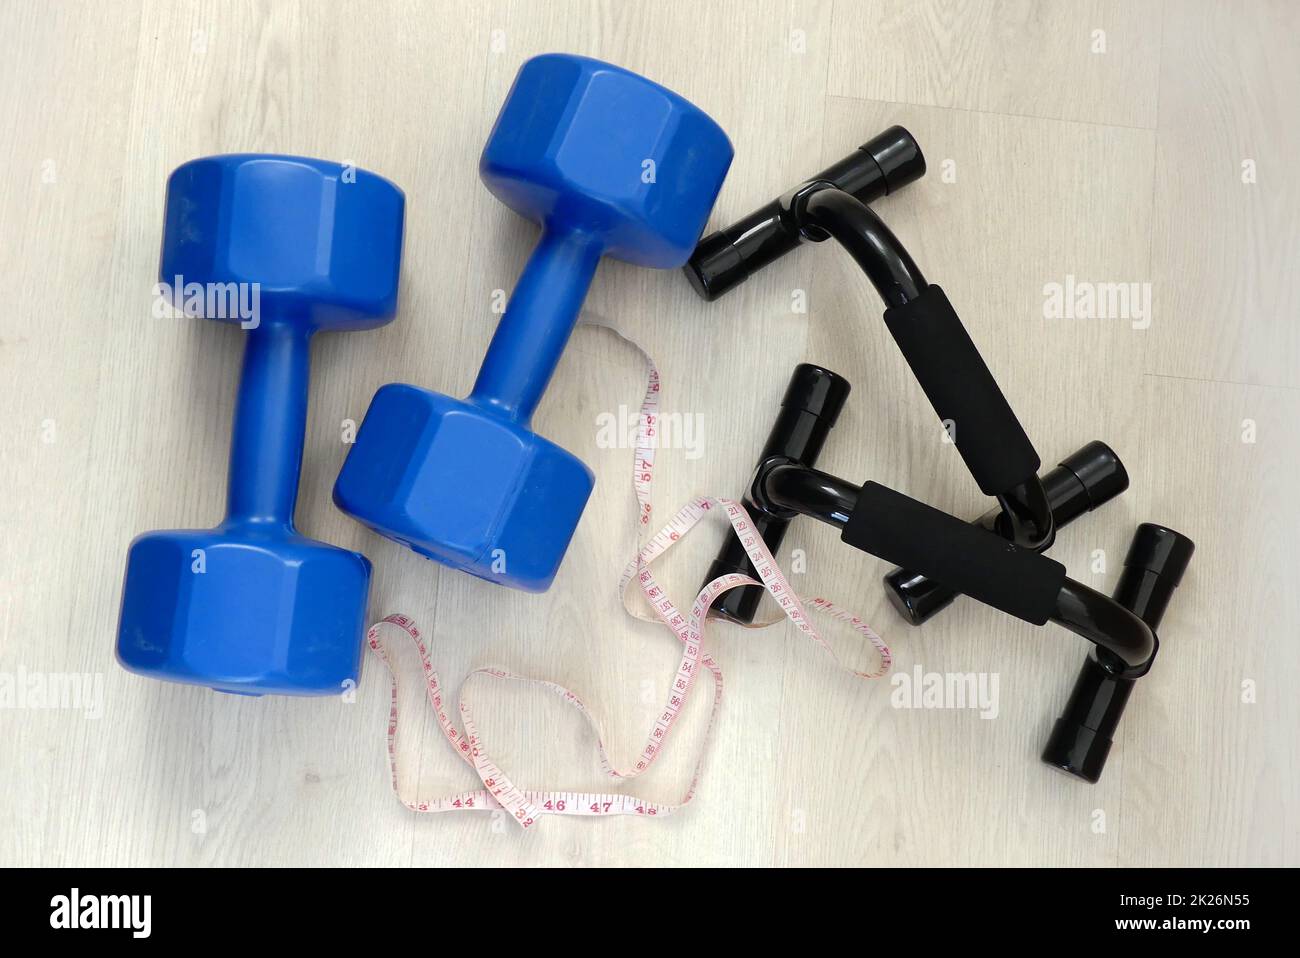 losing weight and losing weight, measuring tape in the same frame, 5 kg double hand dumbbells and push-up apparatus Stock Photo